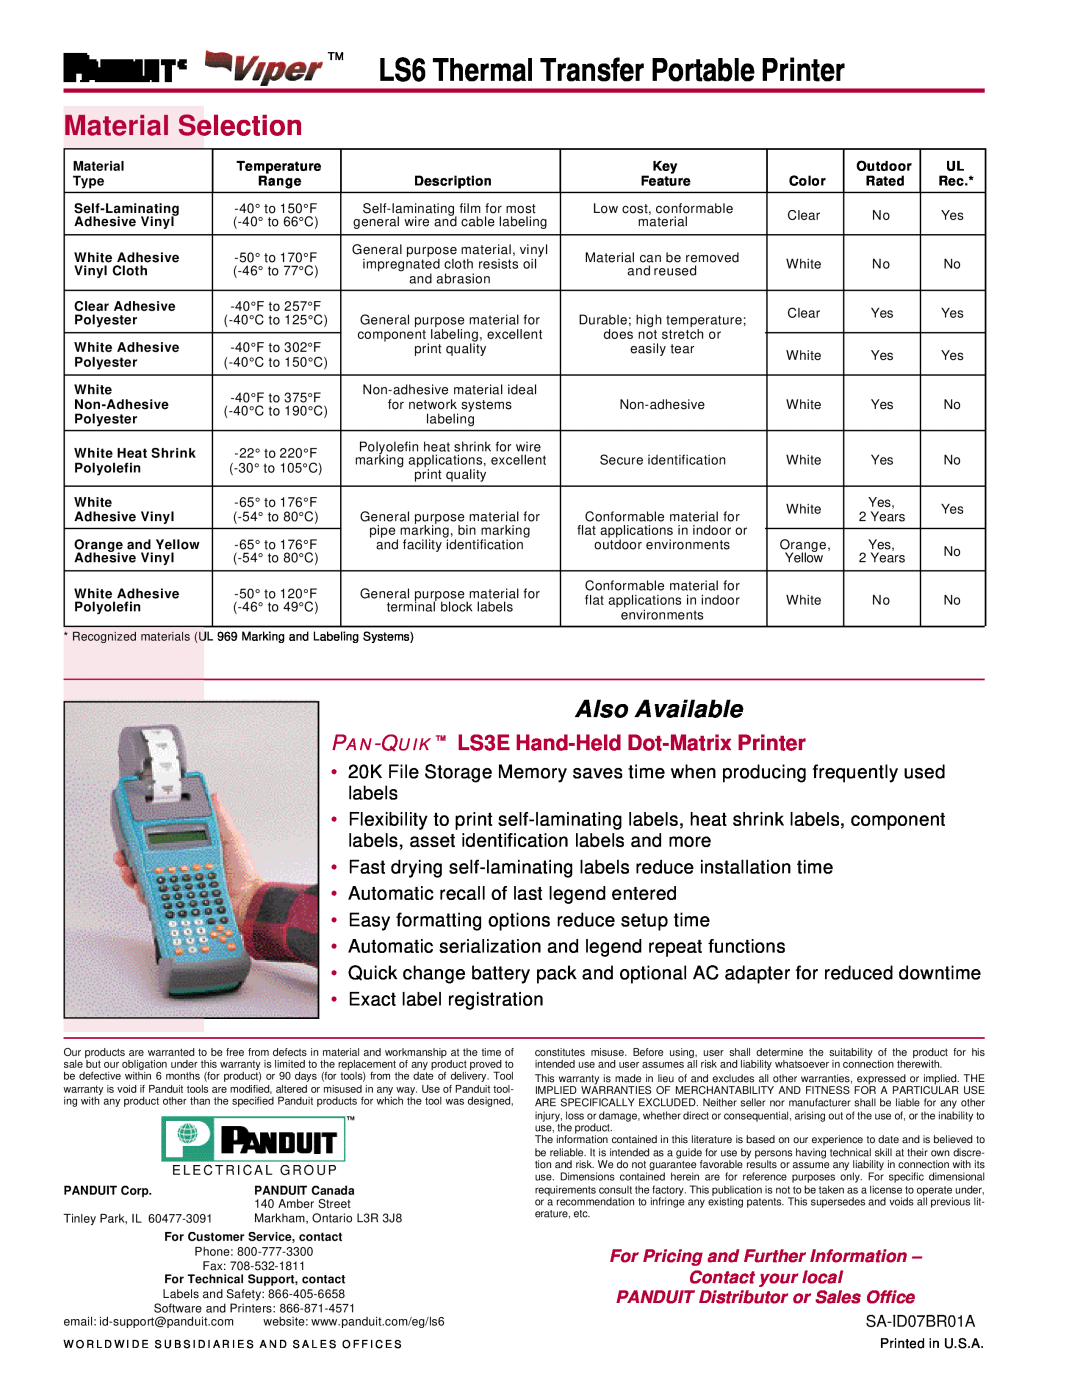 Panduit Material, Selection, LS6 Thermal Transfer Portable Printer, Also Available, PANDUIT Distributor or Sales Office 